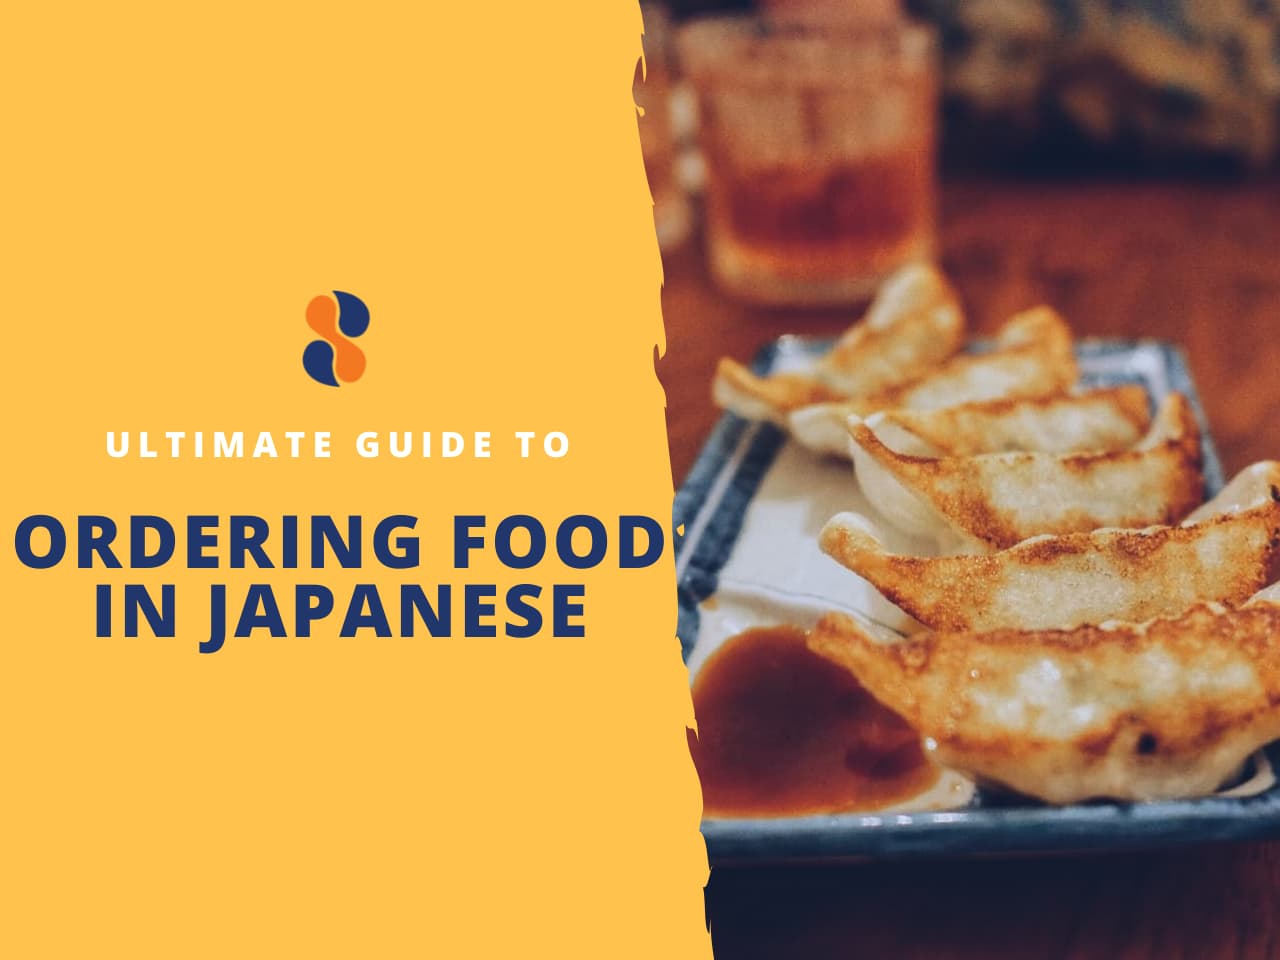 Guide to Japanese Cooking and Recipes Vocabulary